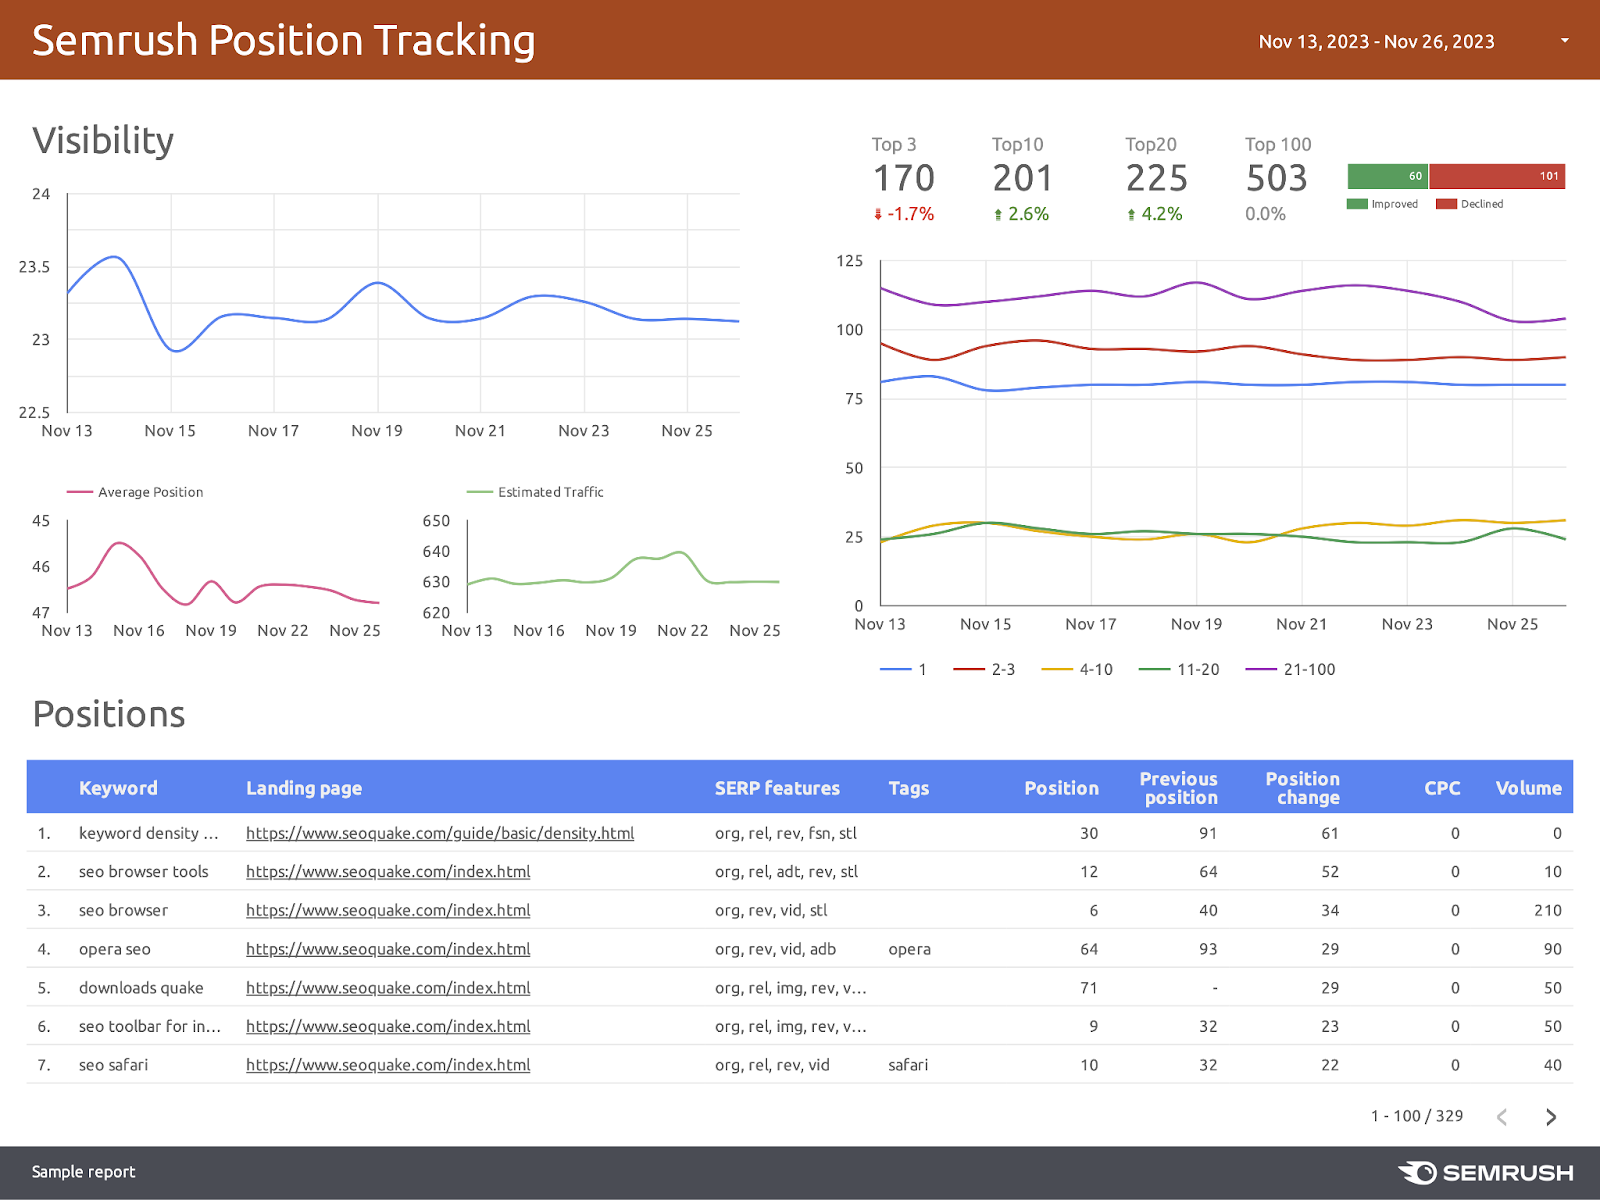 The first page of the Position Tracking report